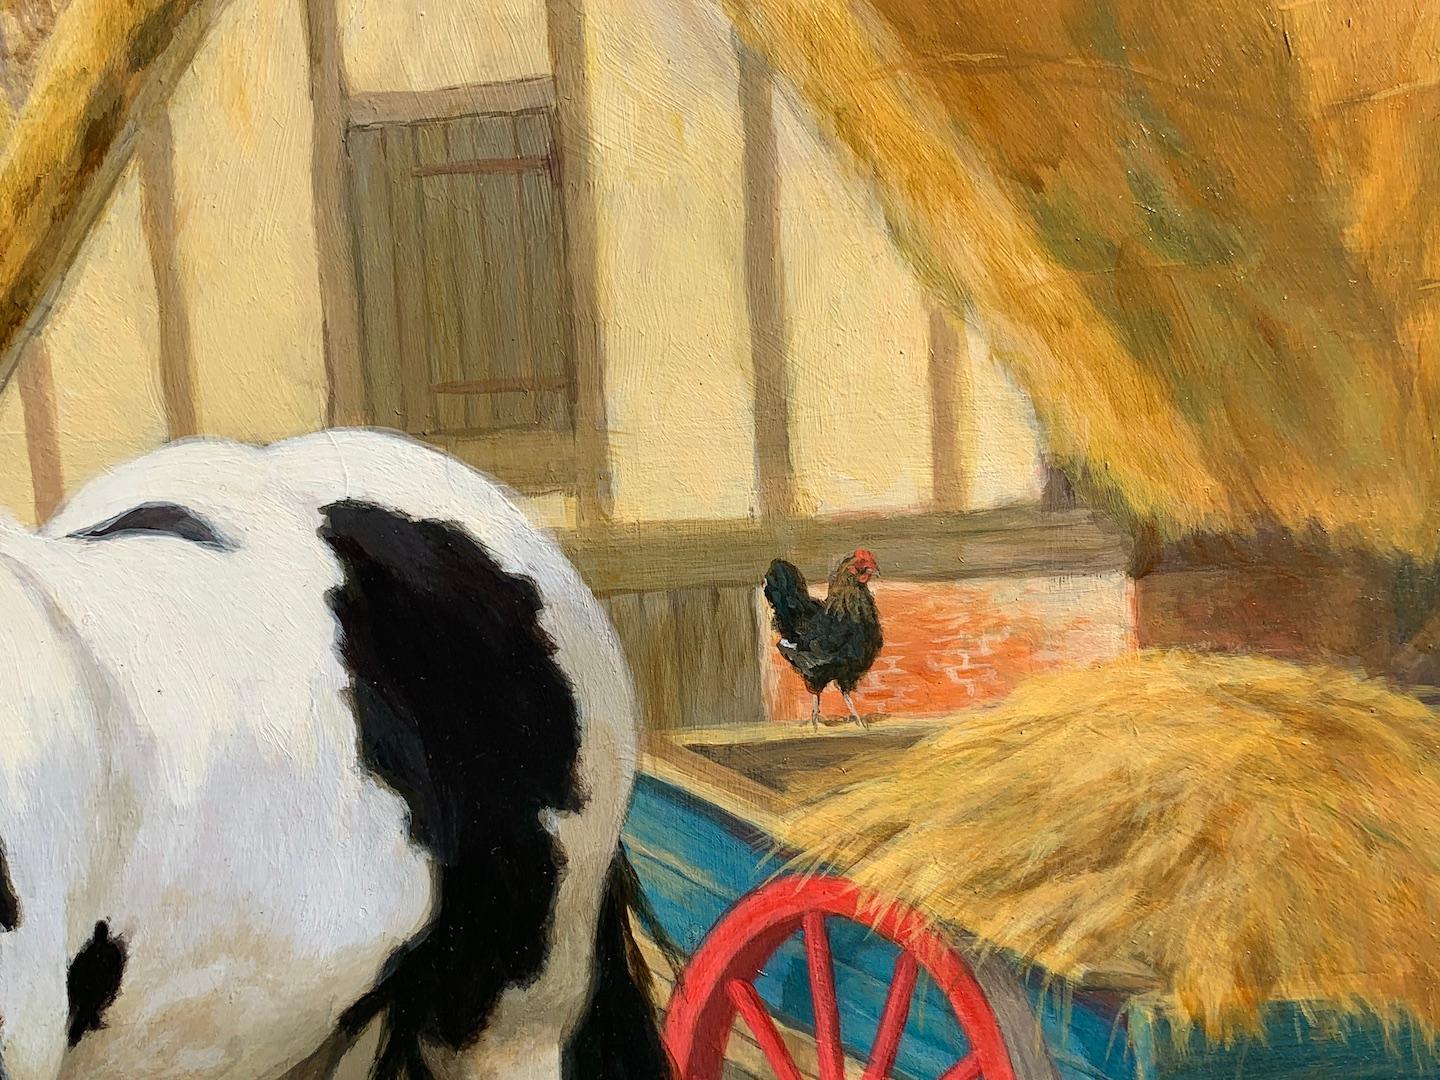 English Farm scene with a Shire horse, chickens, ducks and thatched cottage - Realist Painting by Glynn Williams